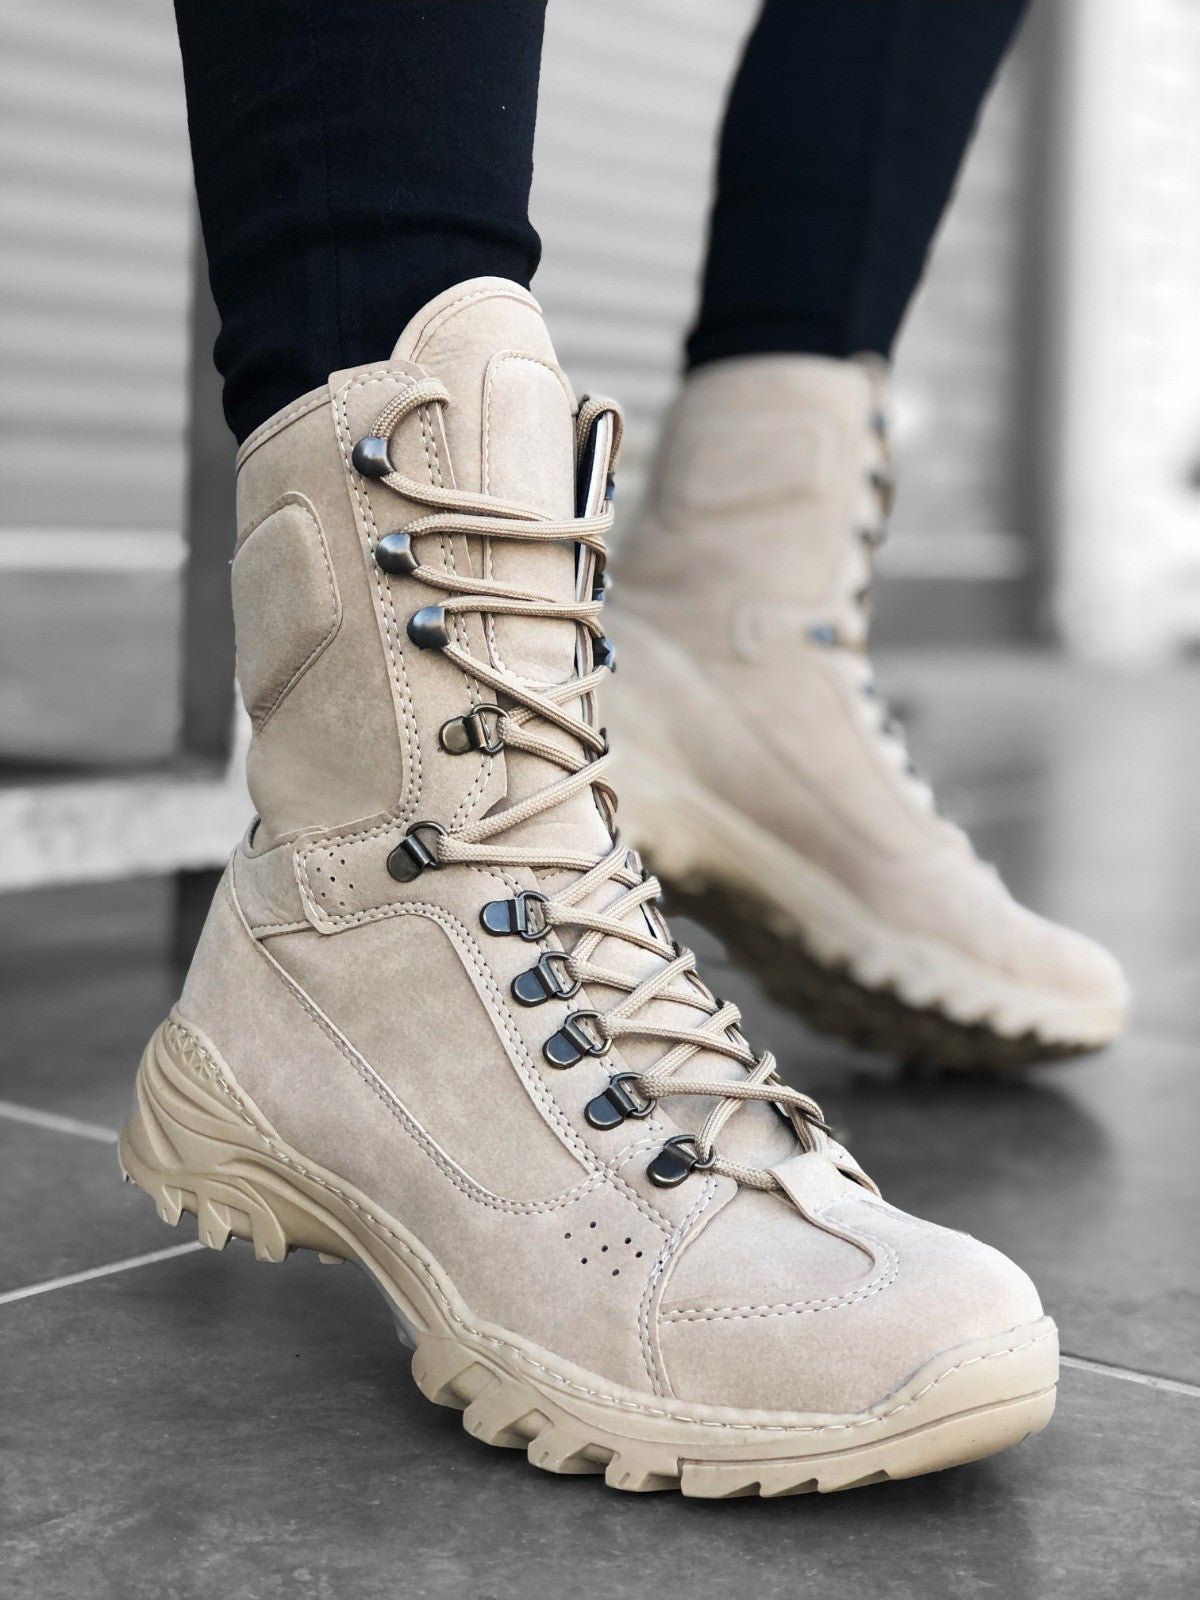 BA0605 Lace-Up Cream Military Boots - STREETMODE ™